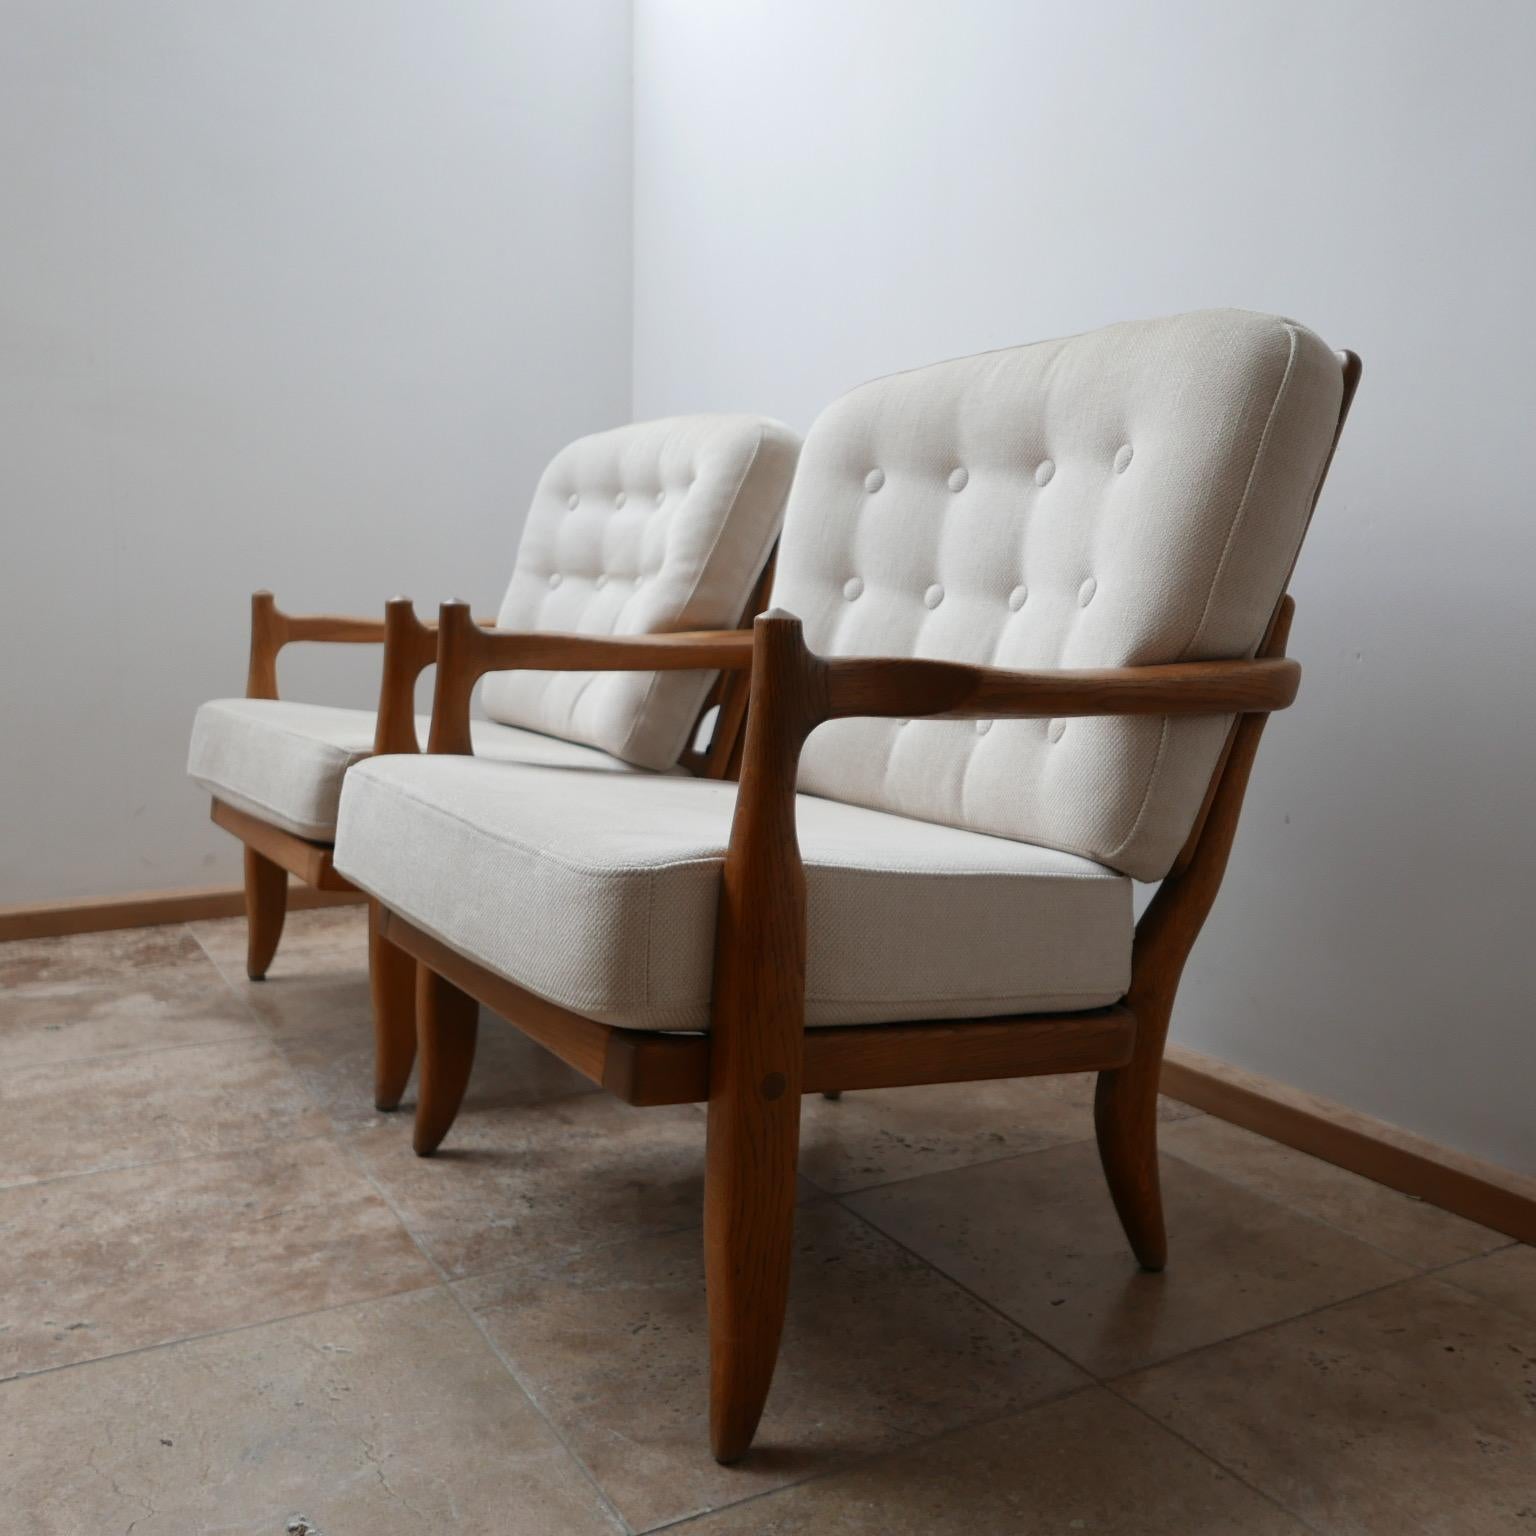 A pair of midcentury armchairs by French design legends Guillerme et Chambron. 

French, circa 1960s.

Solid oak. Original upholstery which could be cleaned and is very usable but could be updated. 

A good compact pair of armchairs that